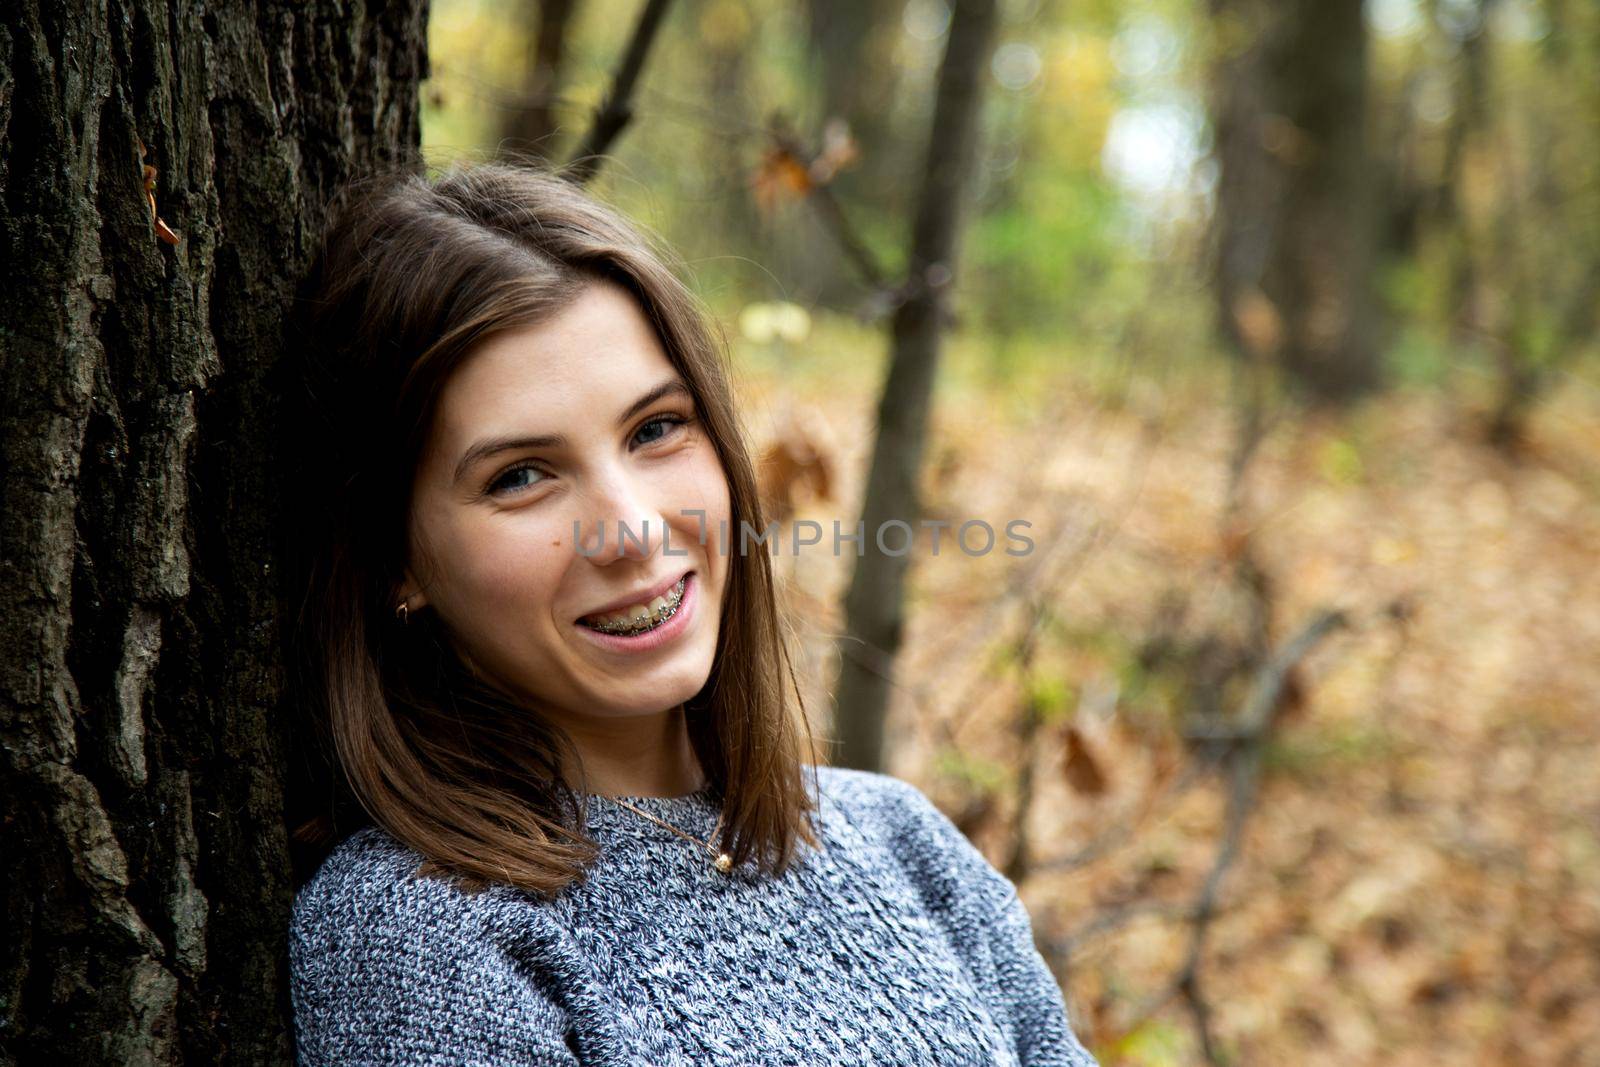 Young beautiful girl with braces on her teeth in a gray sweater sits in the autumn forest near a large tree and smiles sweetly by lunarts